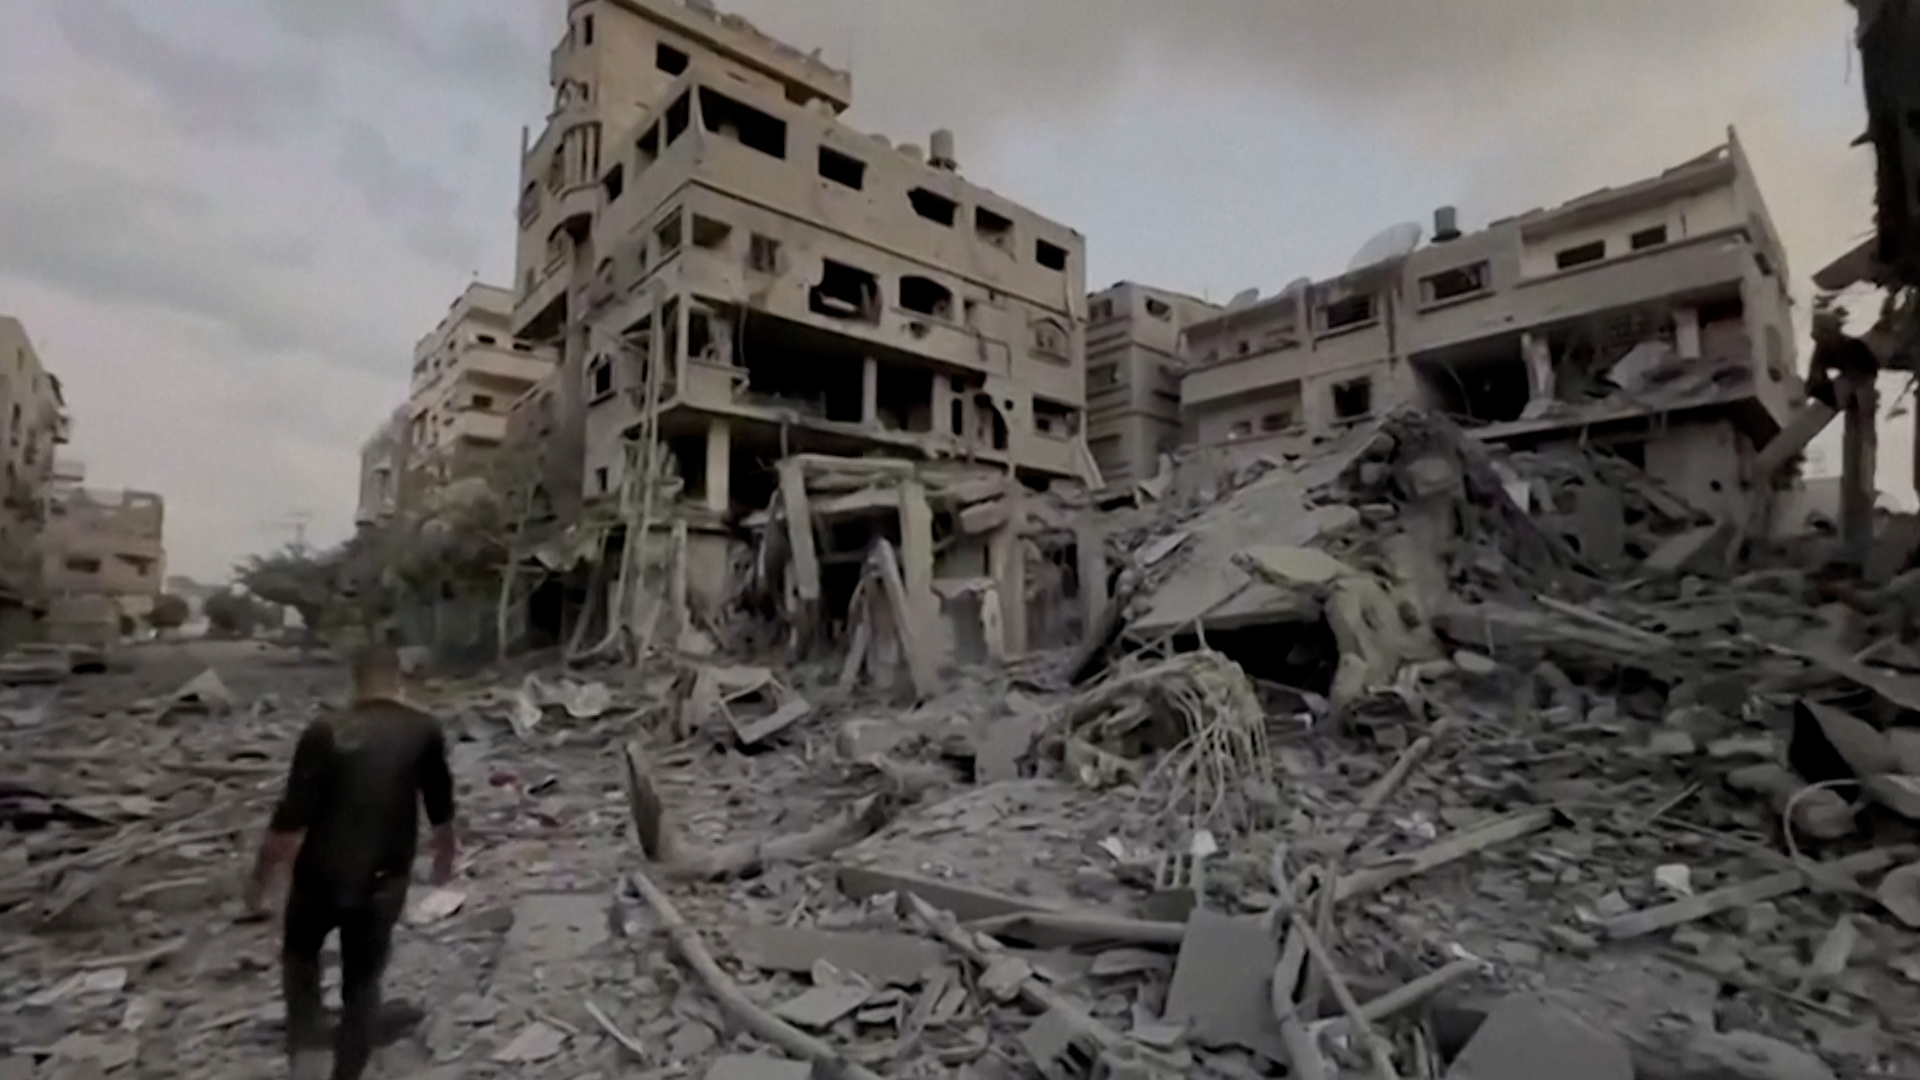 Destruction in Gaza outpaces other recent conflicts, evidence shows -  Washington Post